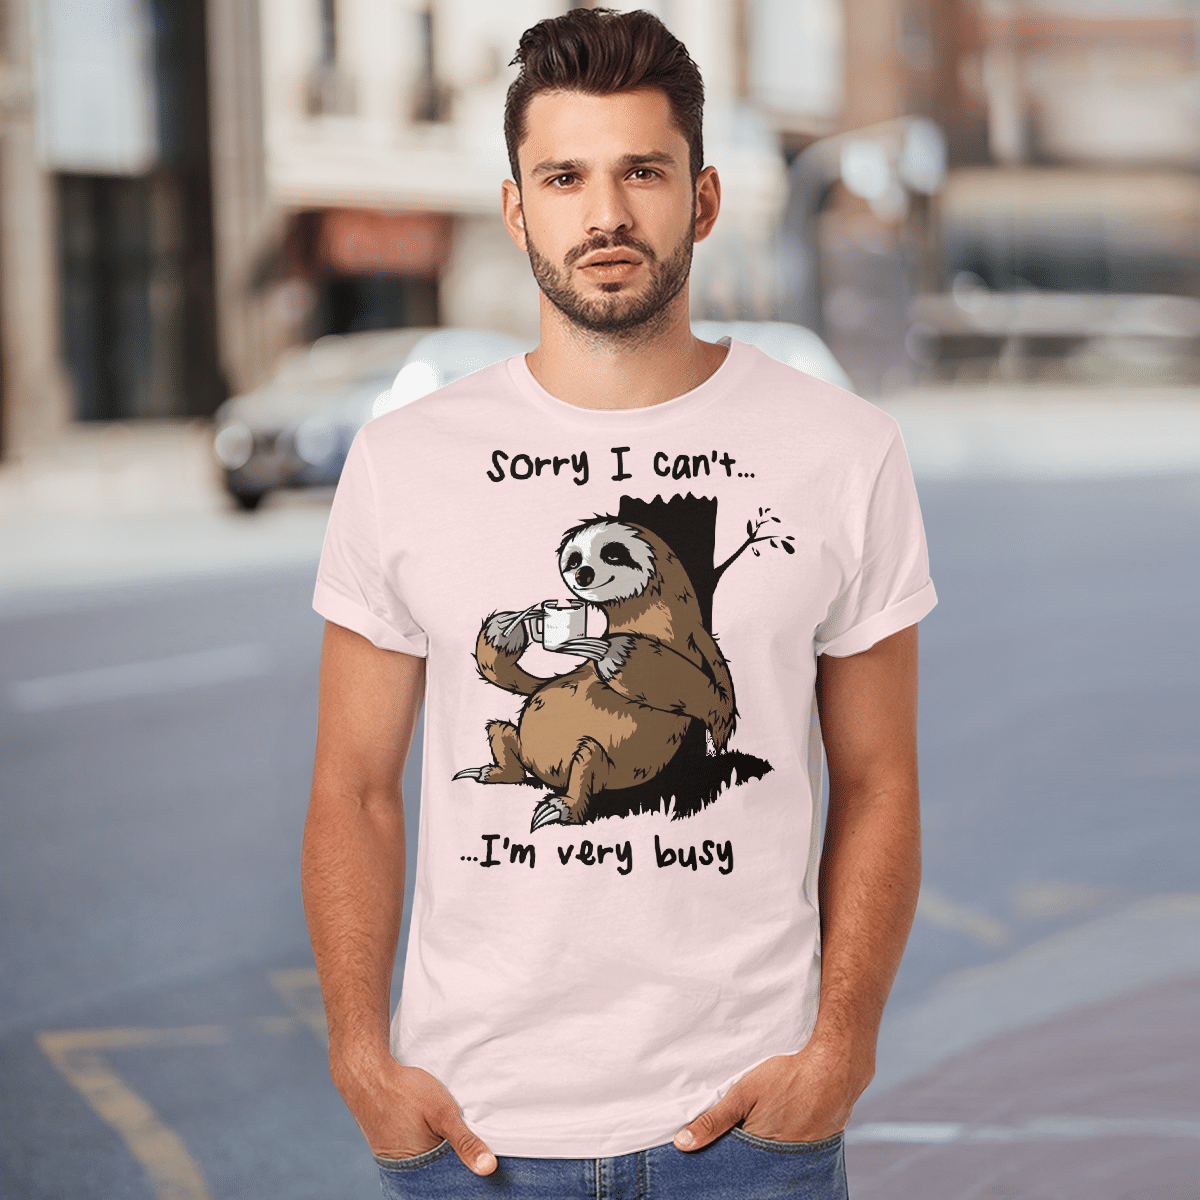 FZLYE Women Sorry I Can't I'm Very Busy Graphic T-Shirt Short Sleeve Funny Sloth Shirt